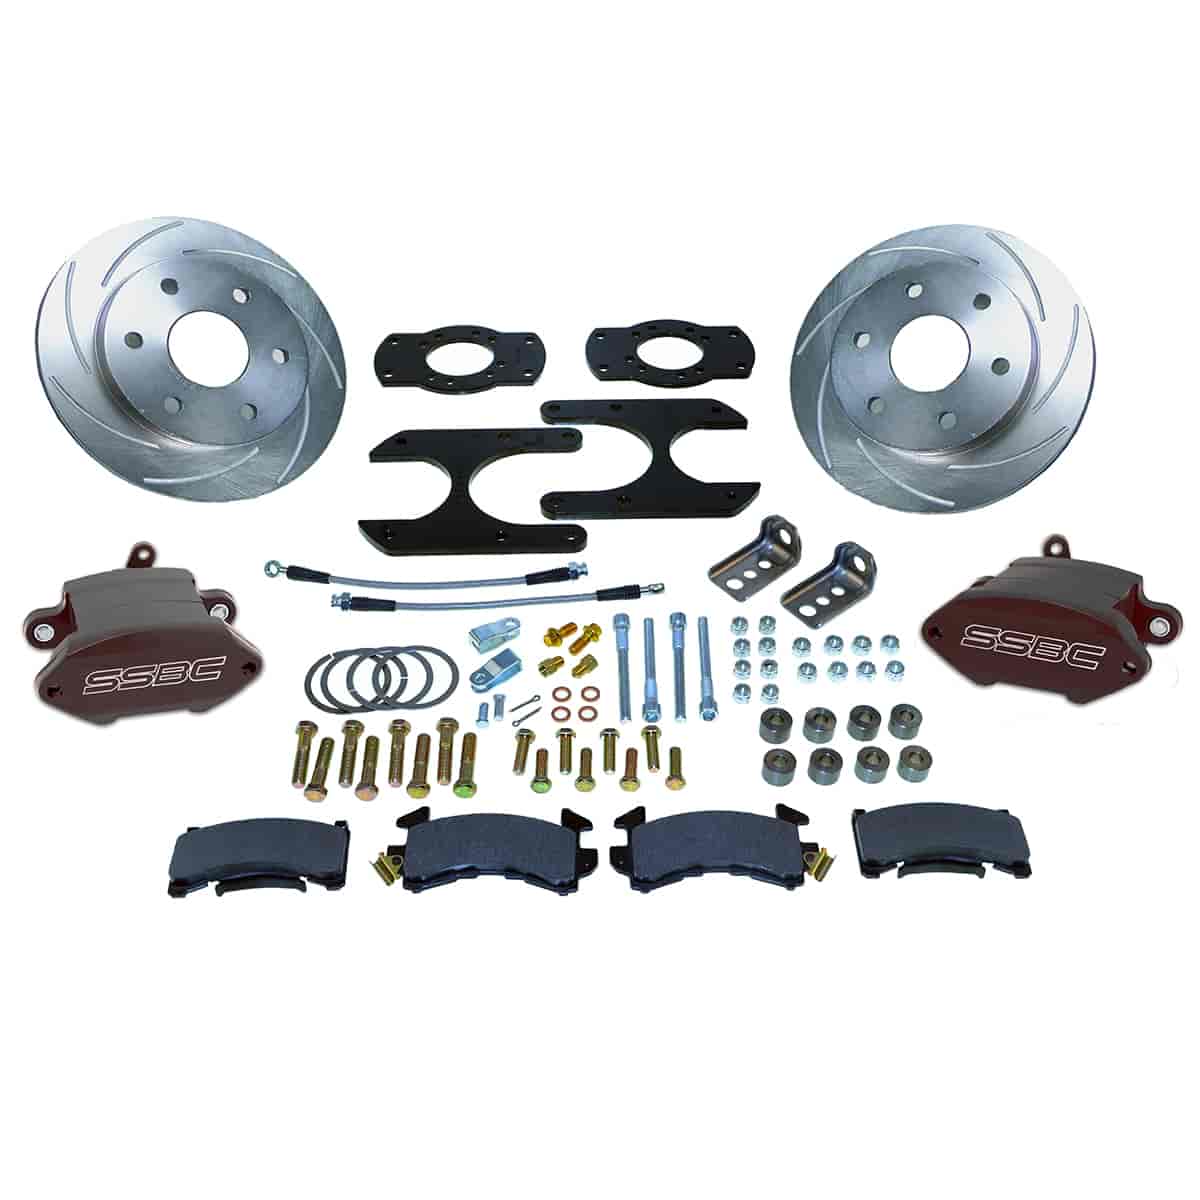 Sport R1 Rear Disc Brake Conversion Kit For Chevy 8.5" 10 bolt and 12 bolt